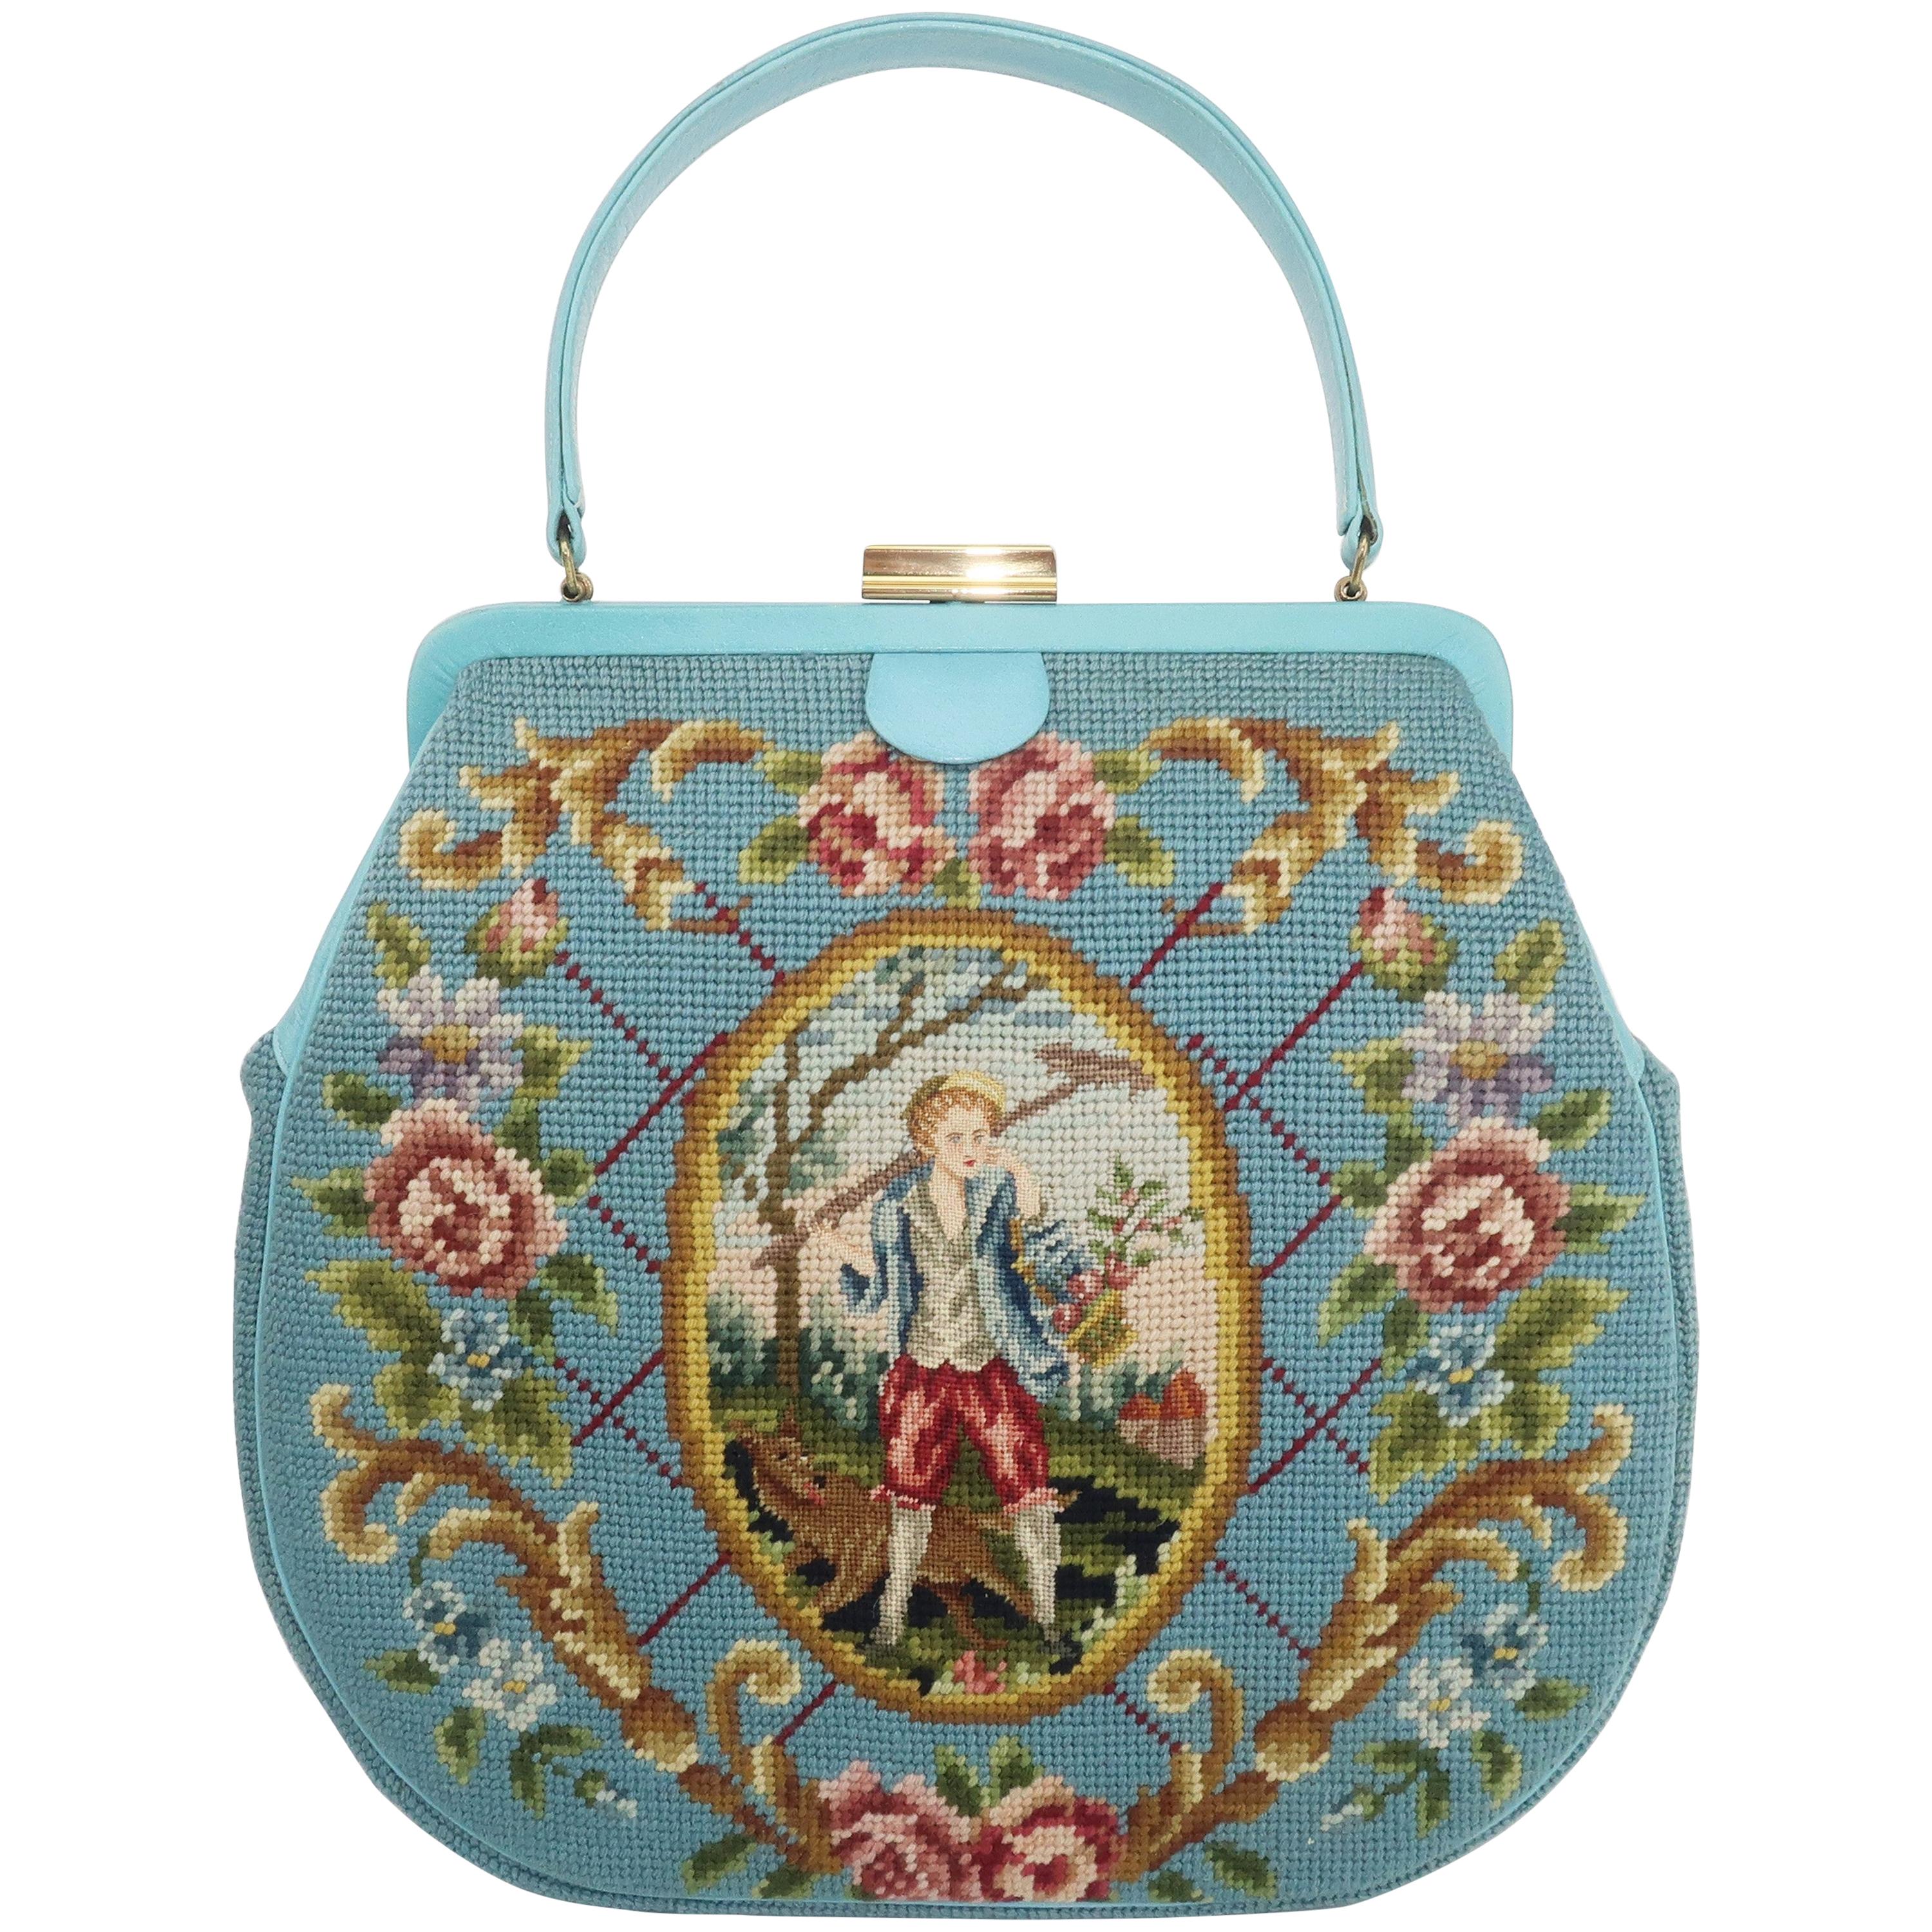 Large Robin Egg Blue Needlepoint Handbag With Country French Scene, 1950's